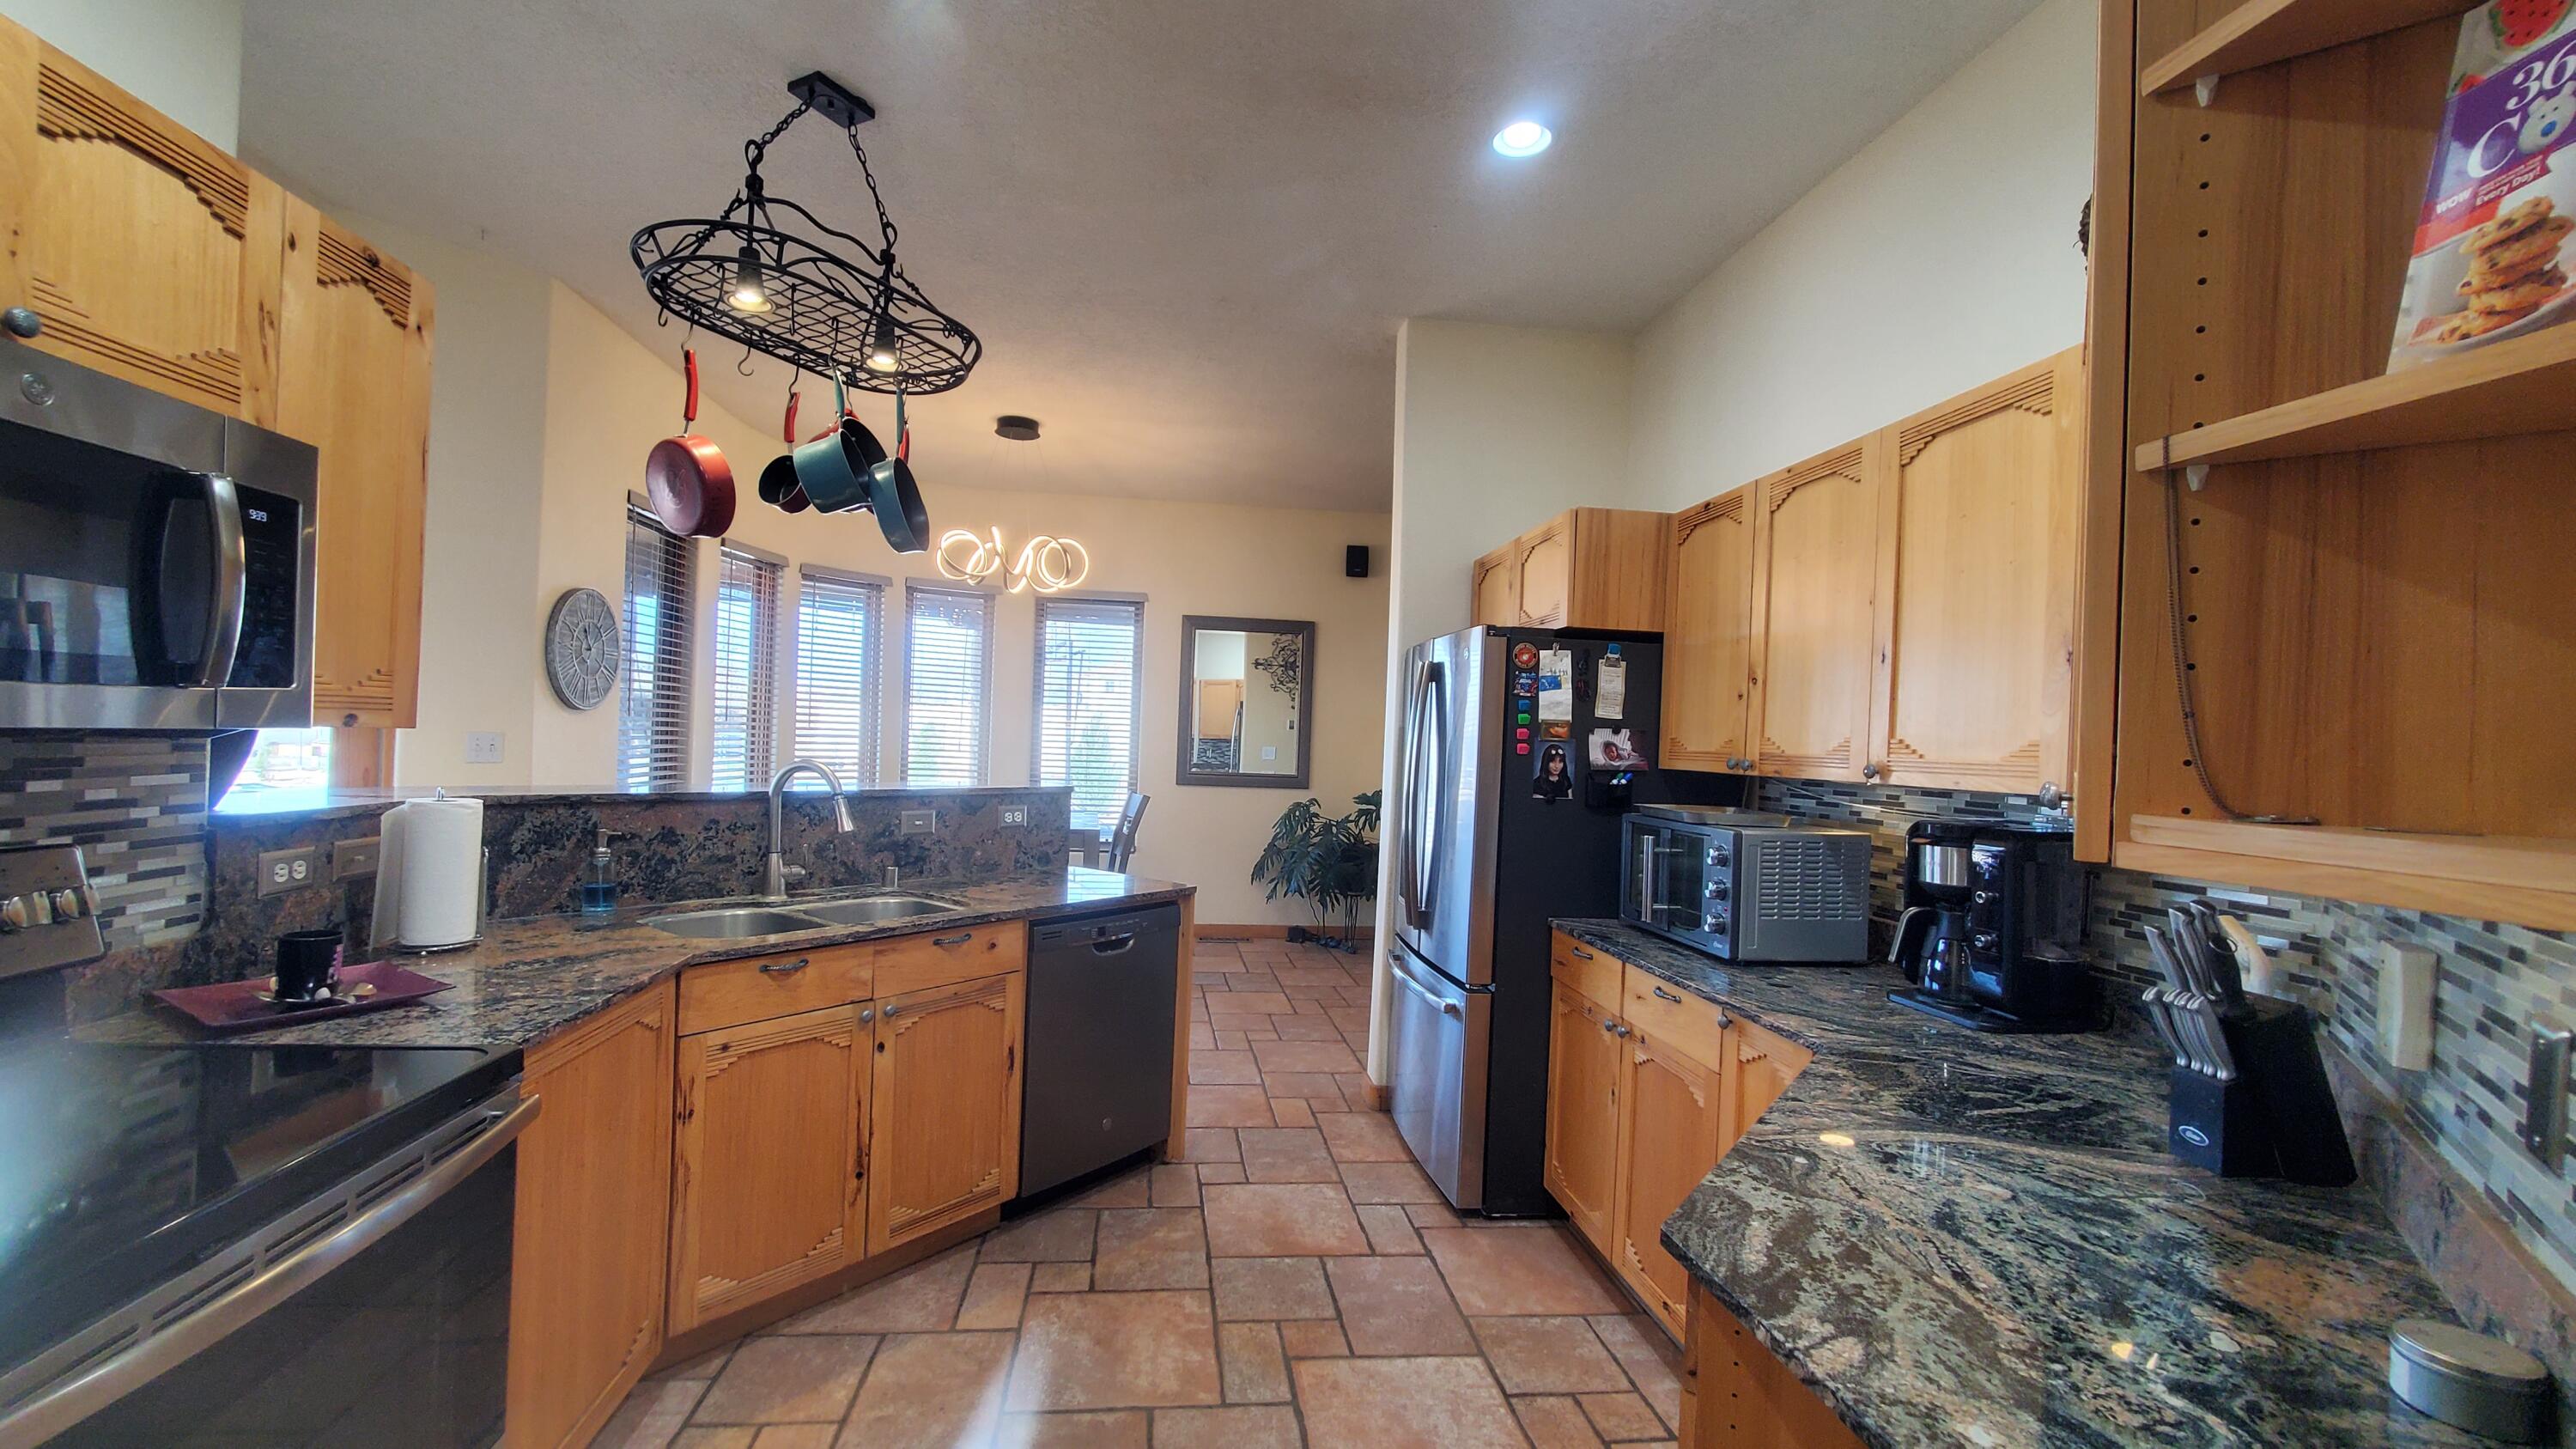 308 Spyglass Place SE, Rio Rancho, New Mexico 87124, 4 Bedrooms Bedrooms, ,4 BathroomsBathrooms,Residential,For Sale,308 Spyglass Place SE,1061573